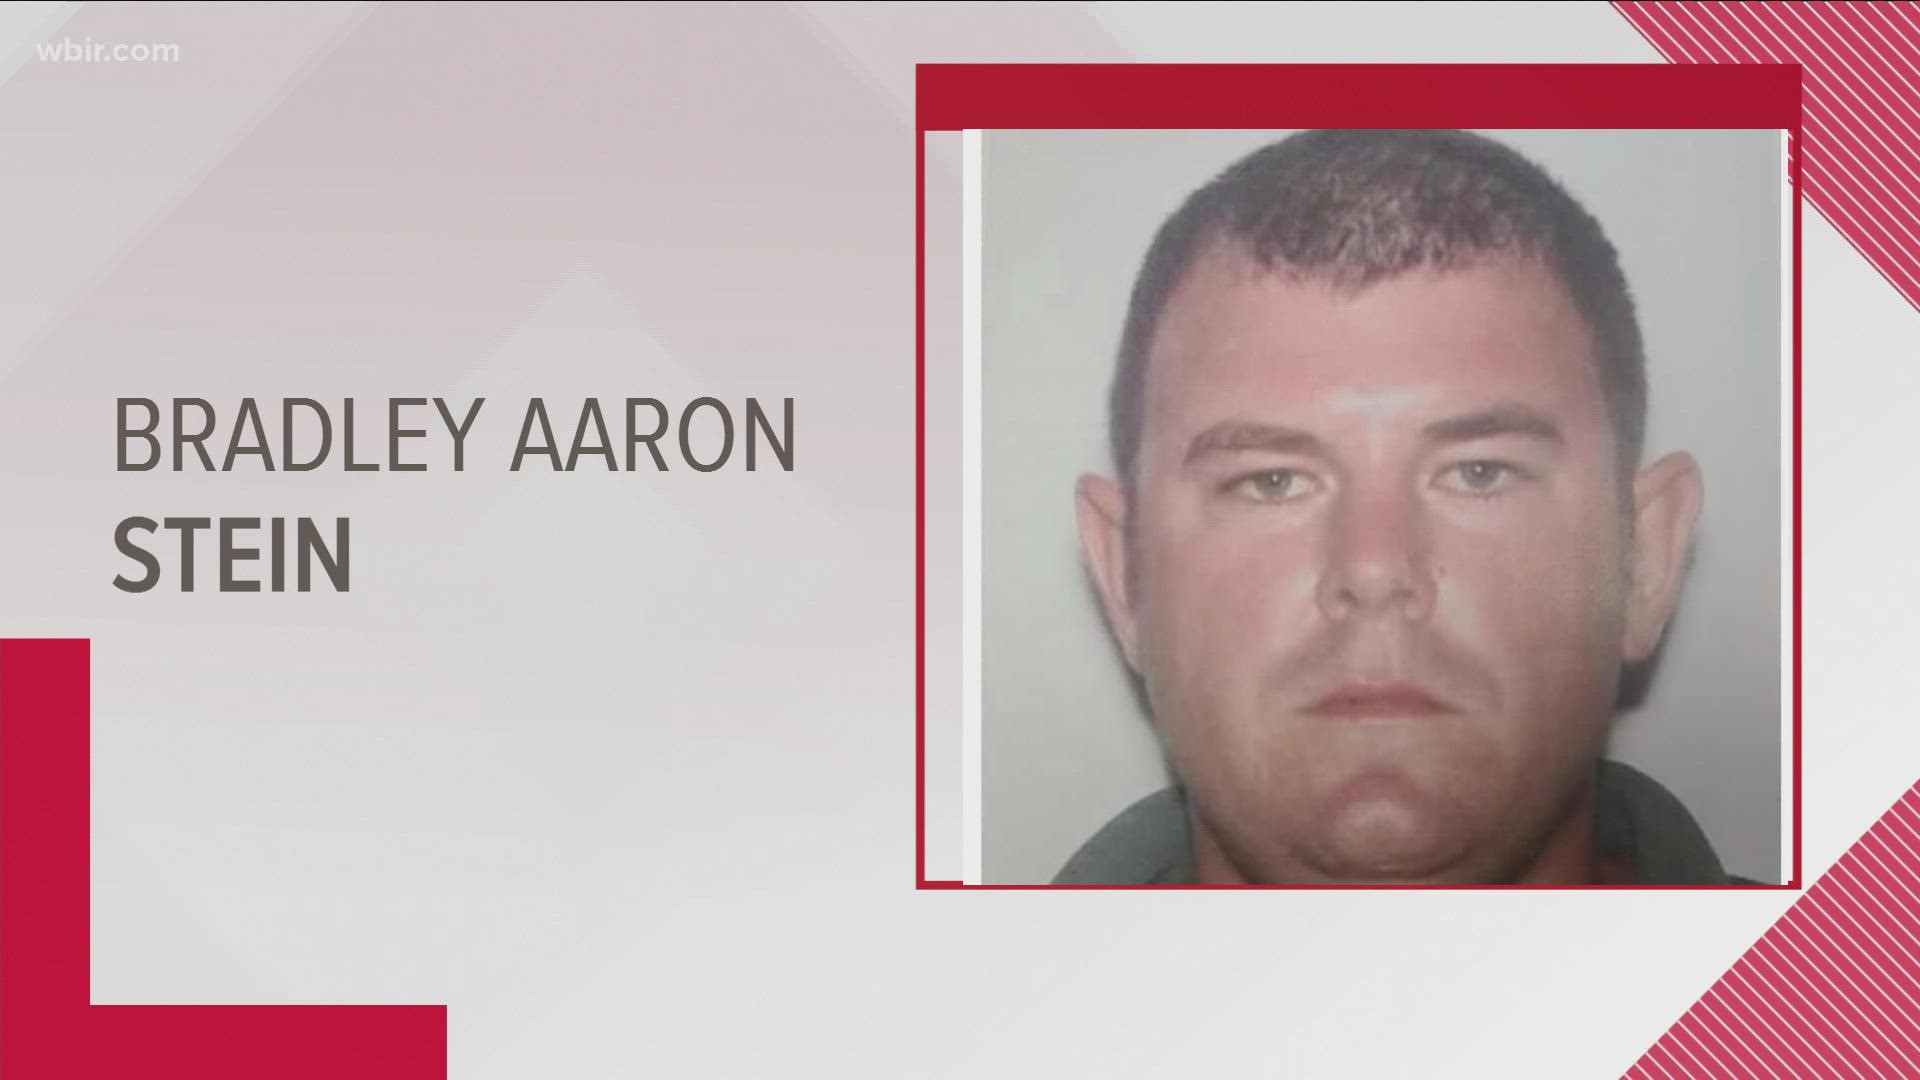 Bradley Aaron Stein is the suspect in a string of carjacking attempts.